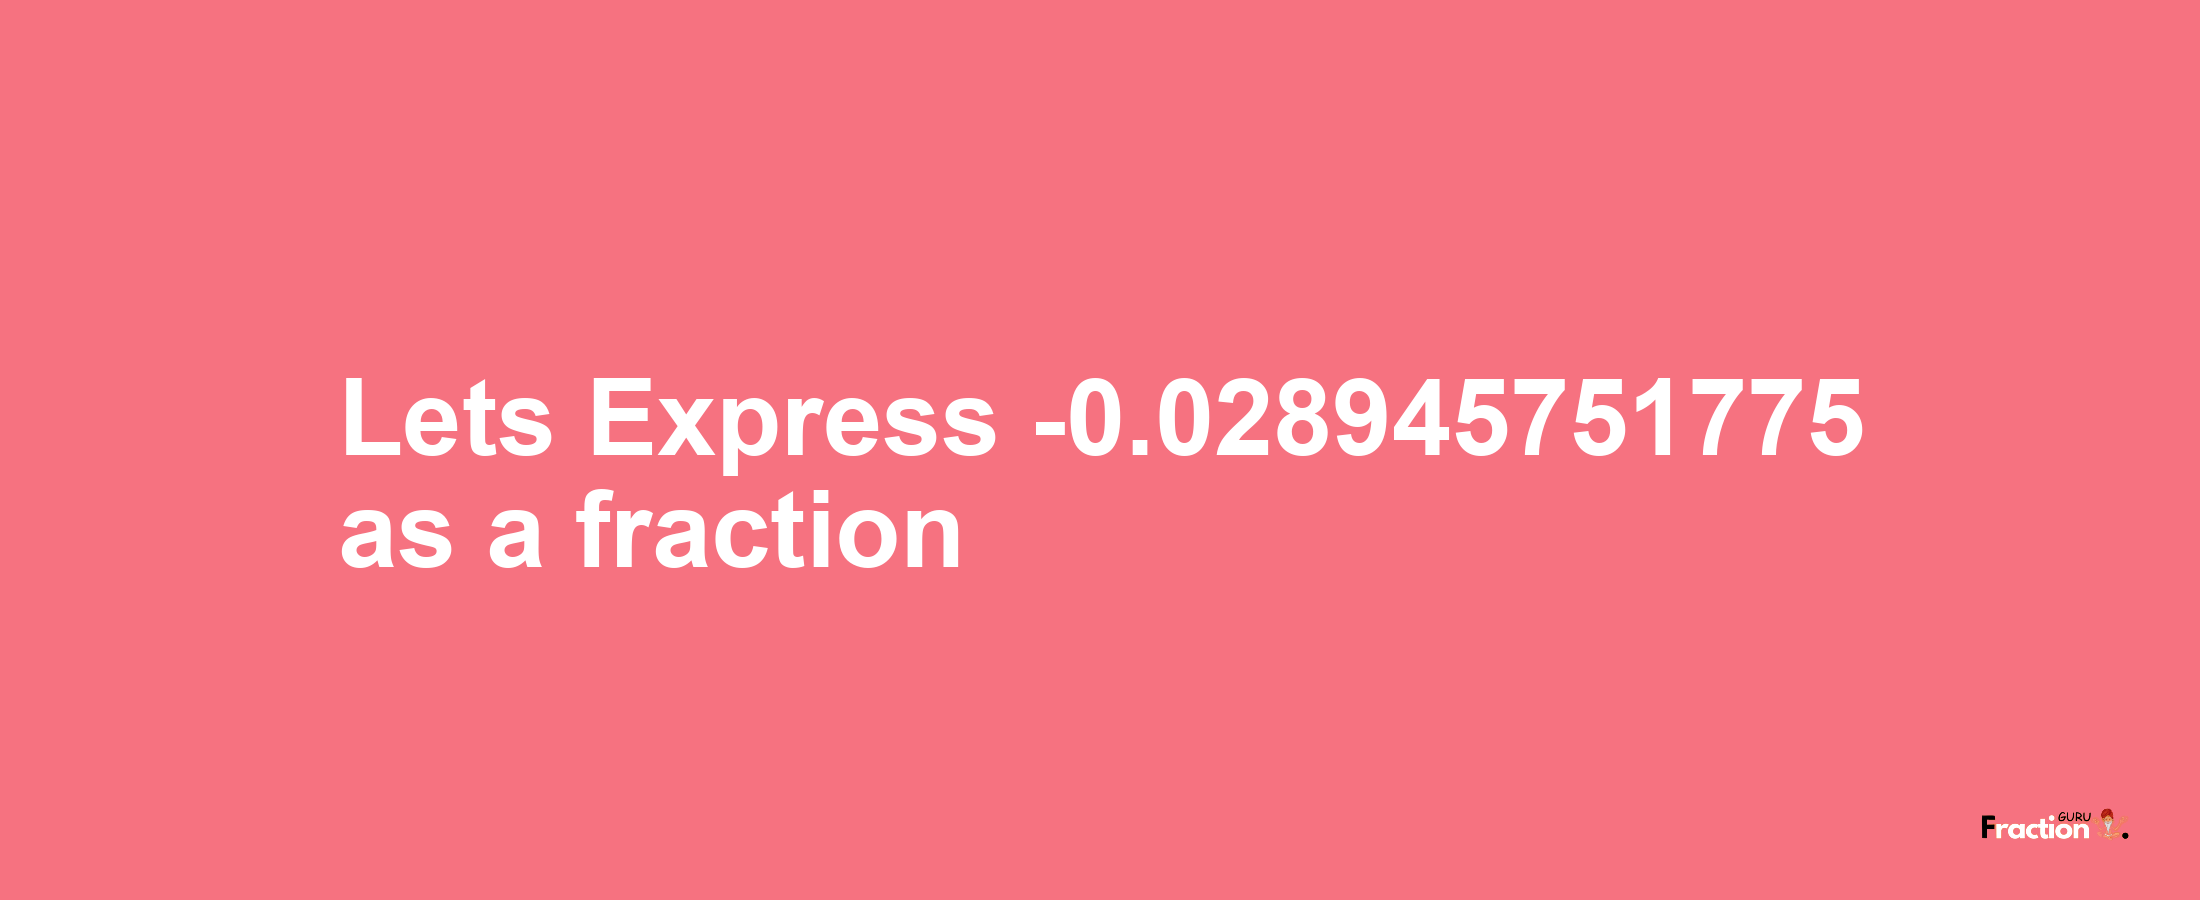 Lets Express -0.028945751775 as afraction